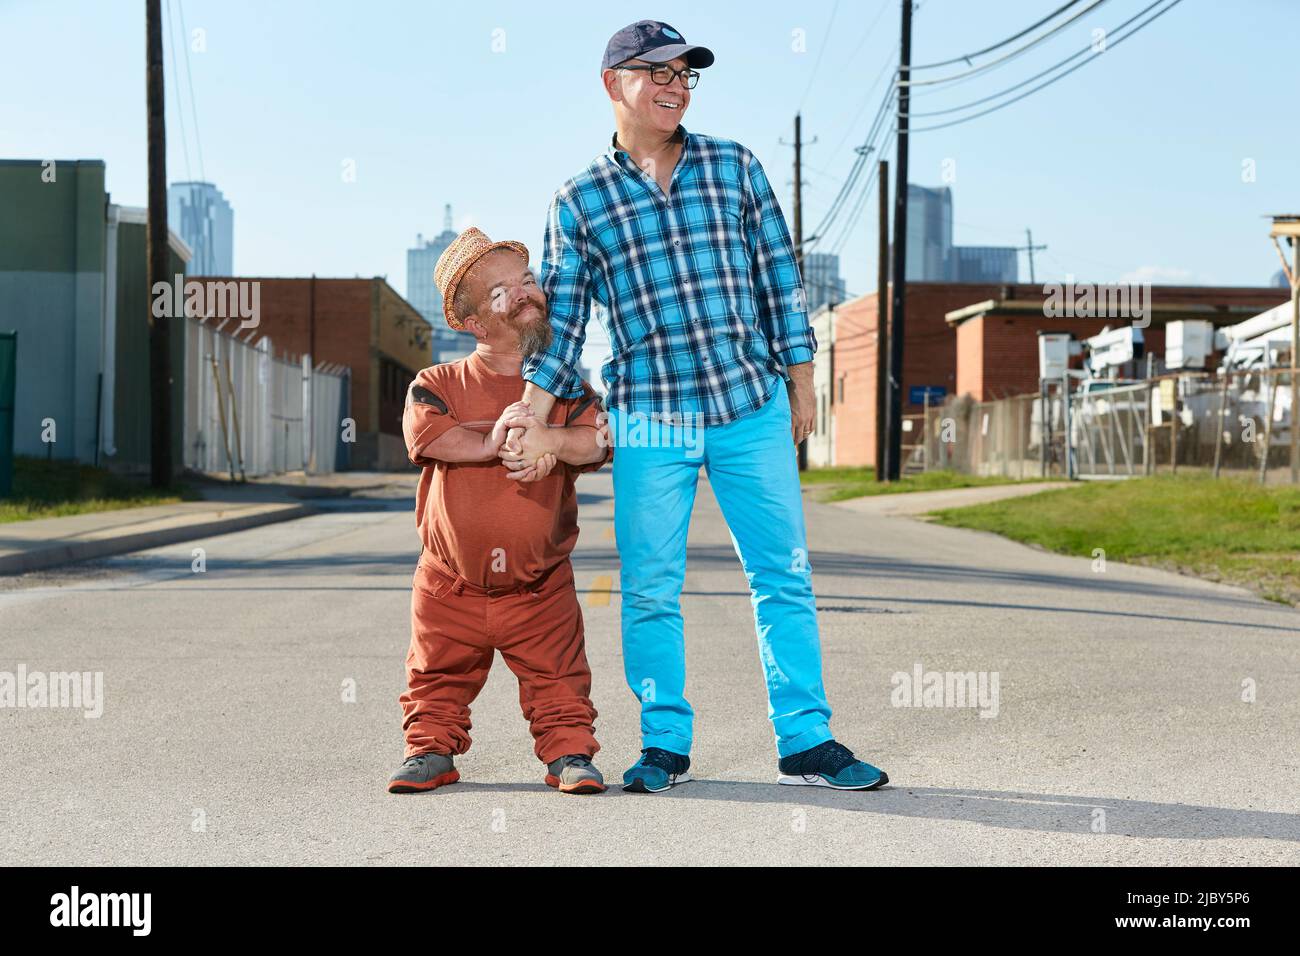 Portrait of male dwarf little person hugging his friend, standing in middle of street. Stock Photo